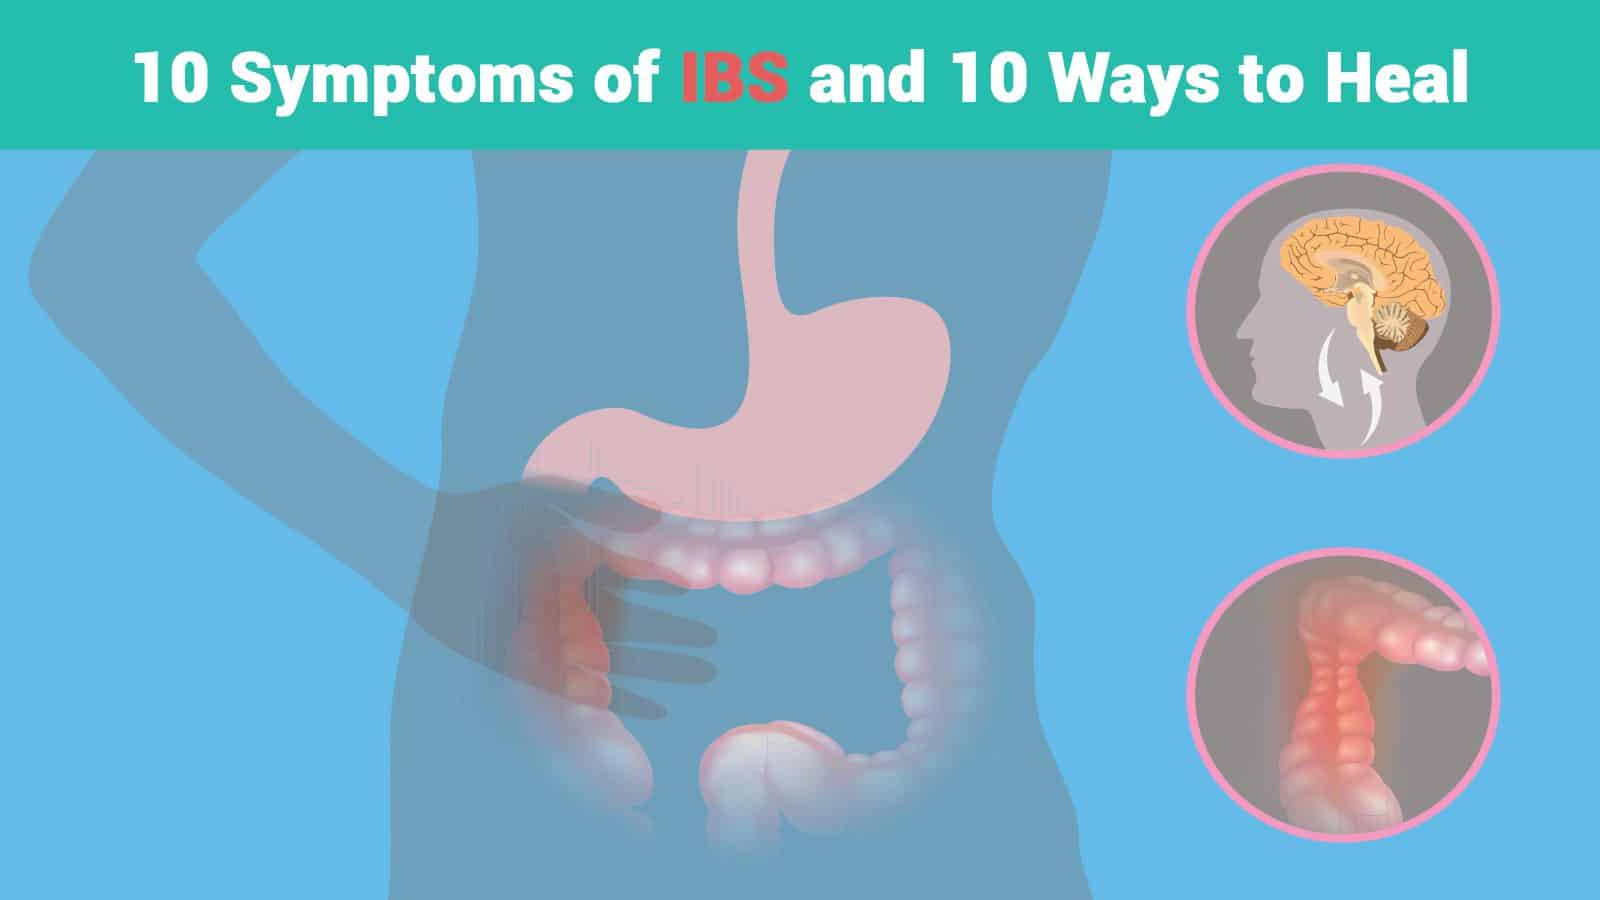 10 Symptoms of IBS and 10 Ways to Heal